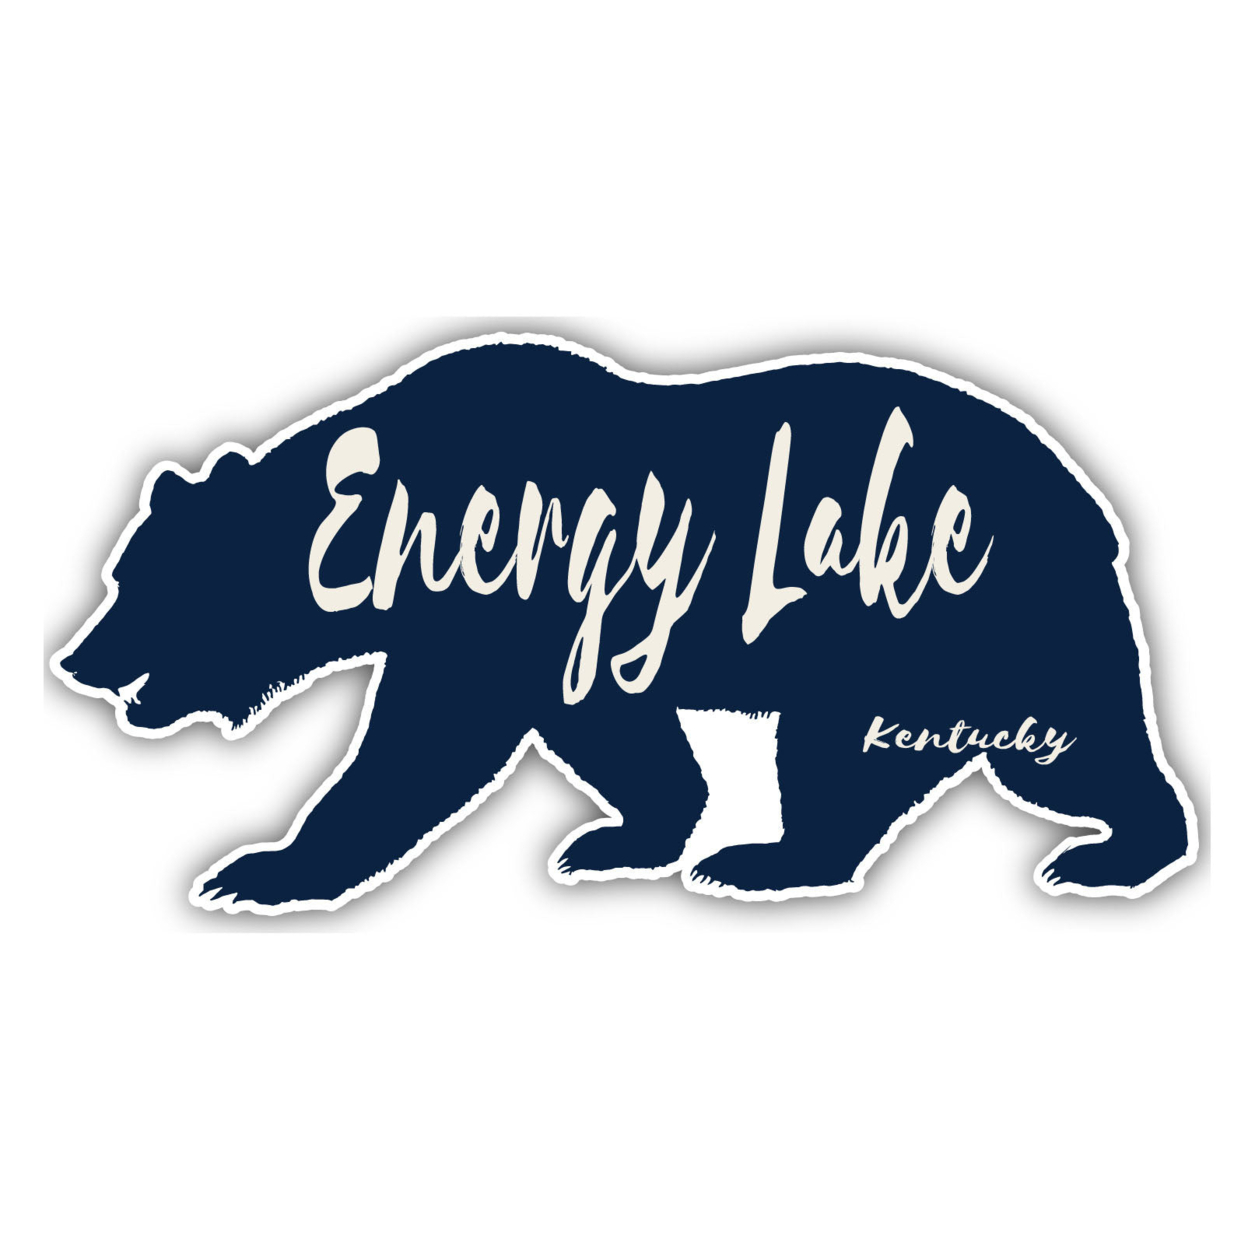 Energy Lake Kentucky Souvenir Decorative Stickers (Choose Theme And Size) - 4-Pack, 12-Inch, Bear